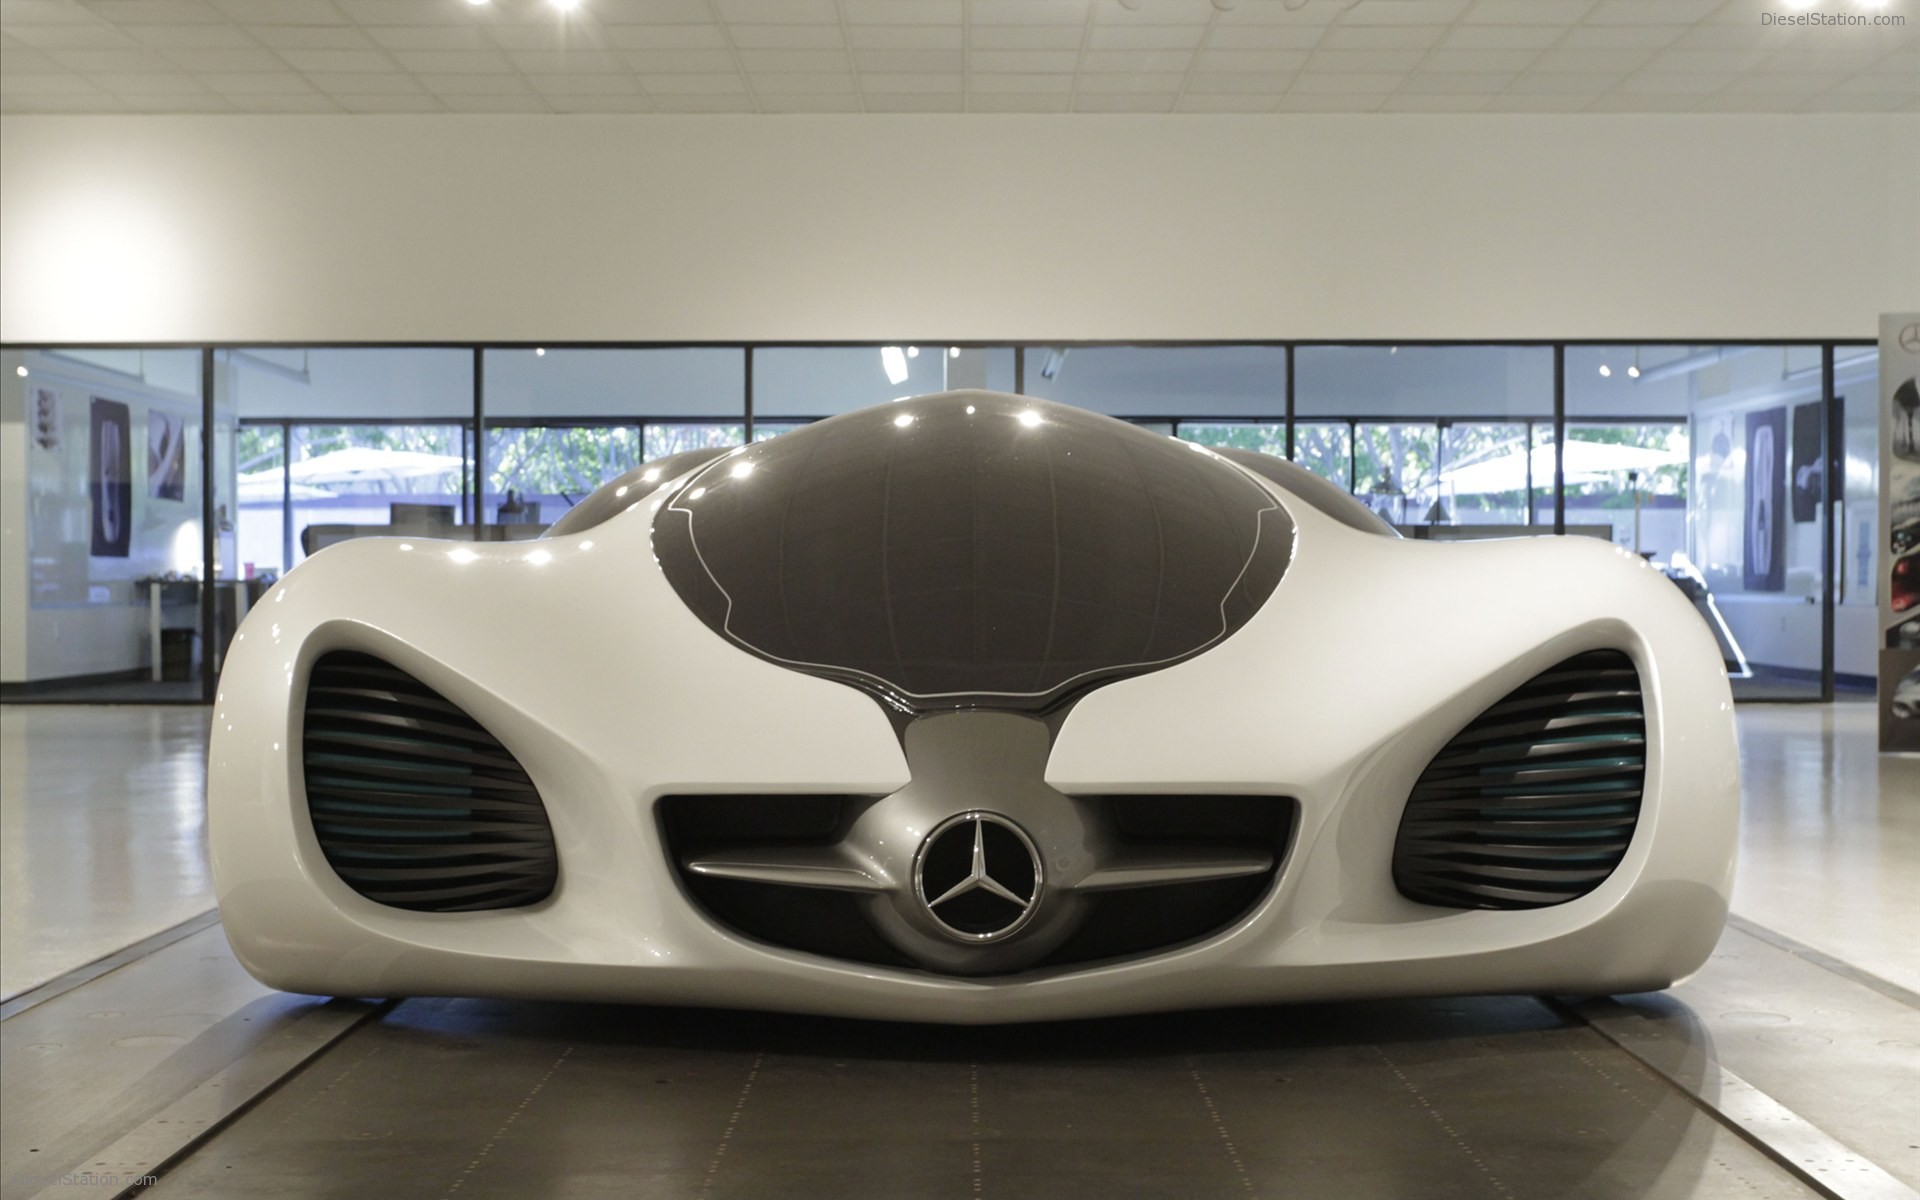 Mercedes Benz Biome Concept 2010 Widescreen Exotic Car Wallpaper Of 22, Diesel Station